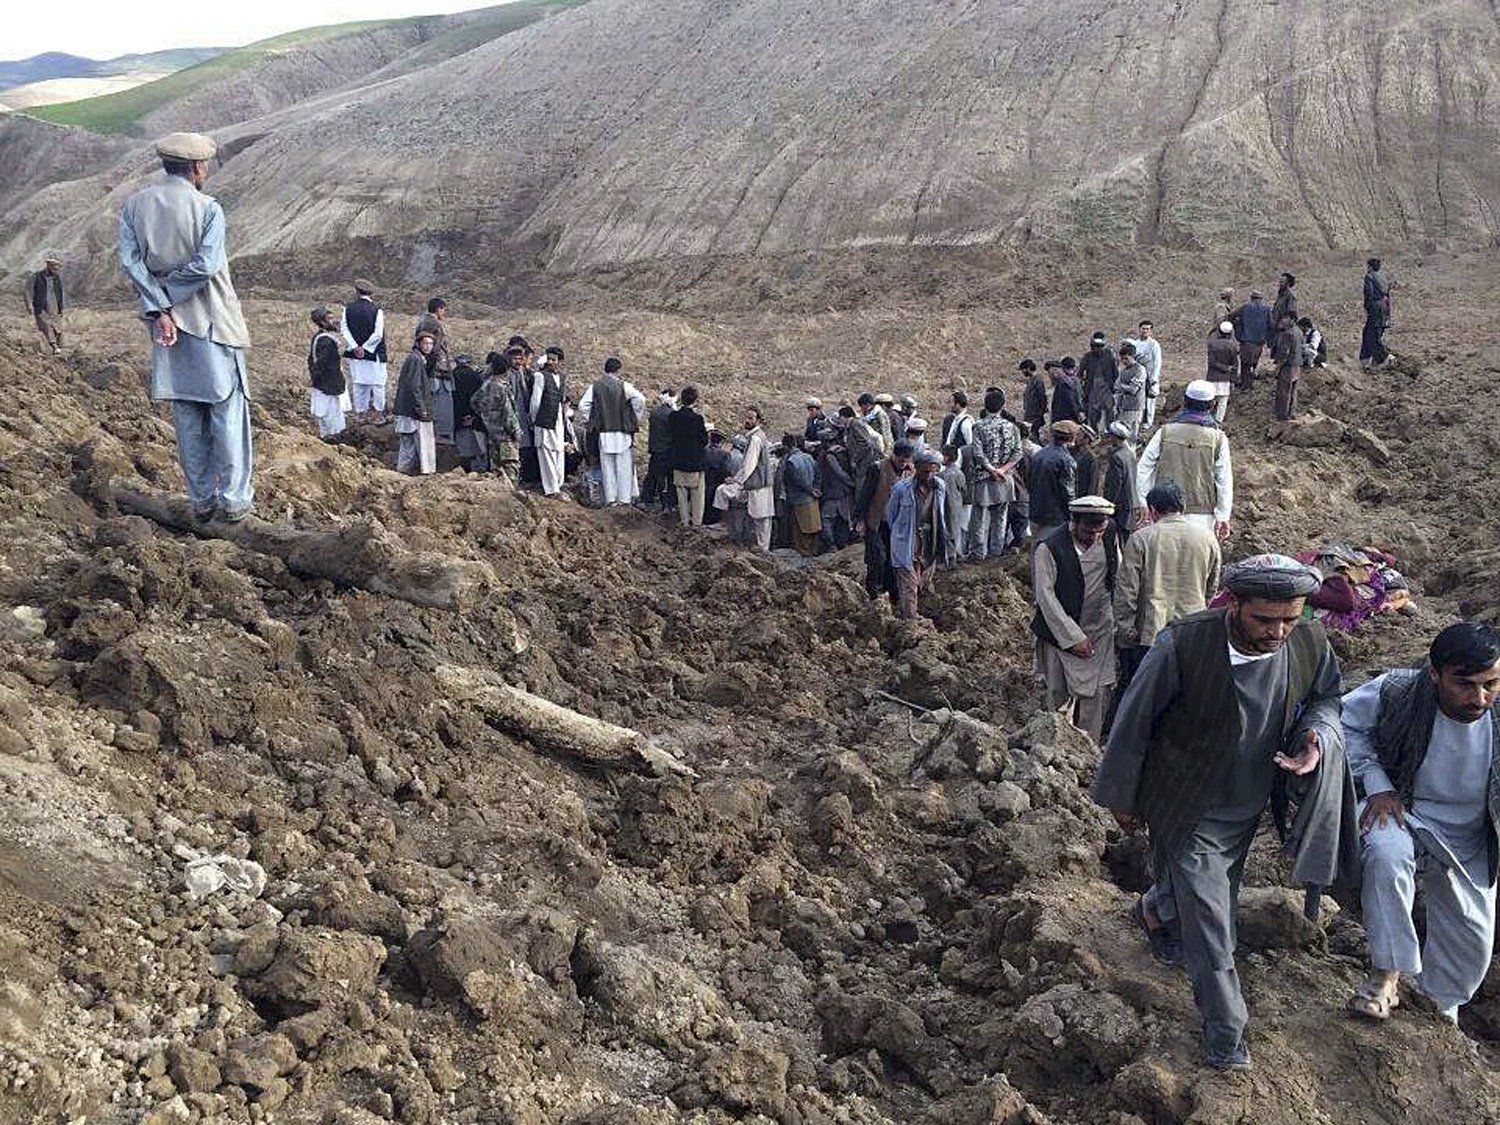 Afghan villagers gather at the site of a landslide at the Argo district in Badakhshan province, May 2, 2014. (Reuters)